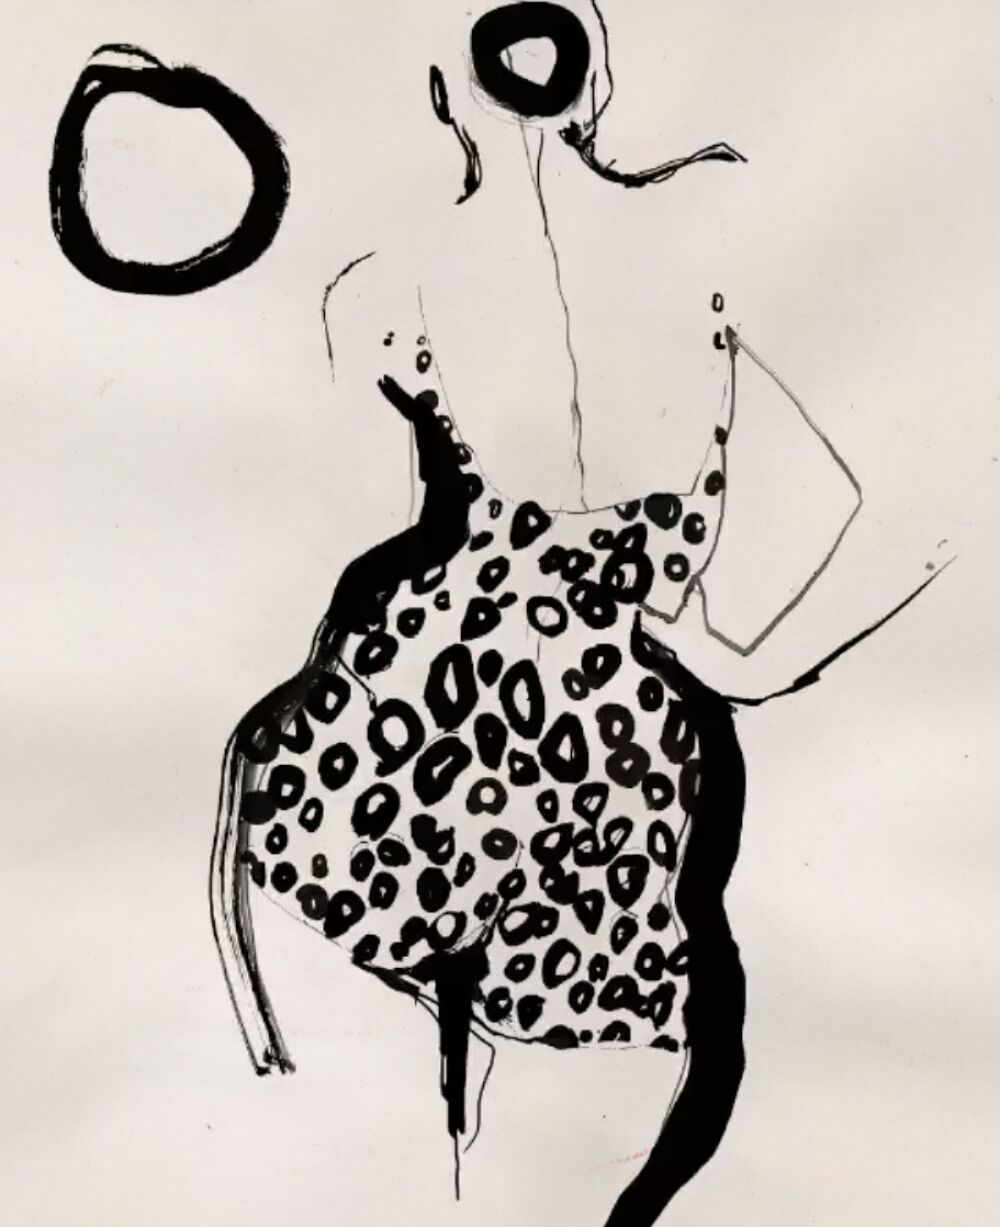 Black ink sensual illustration by Stina Persson 